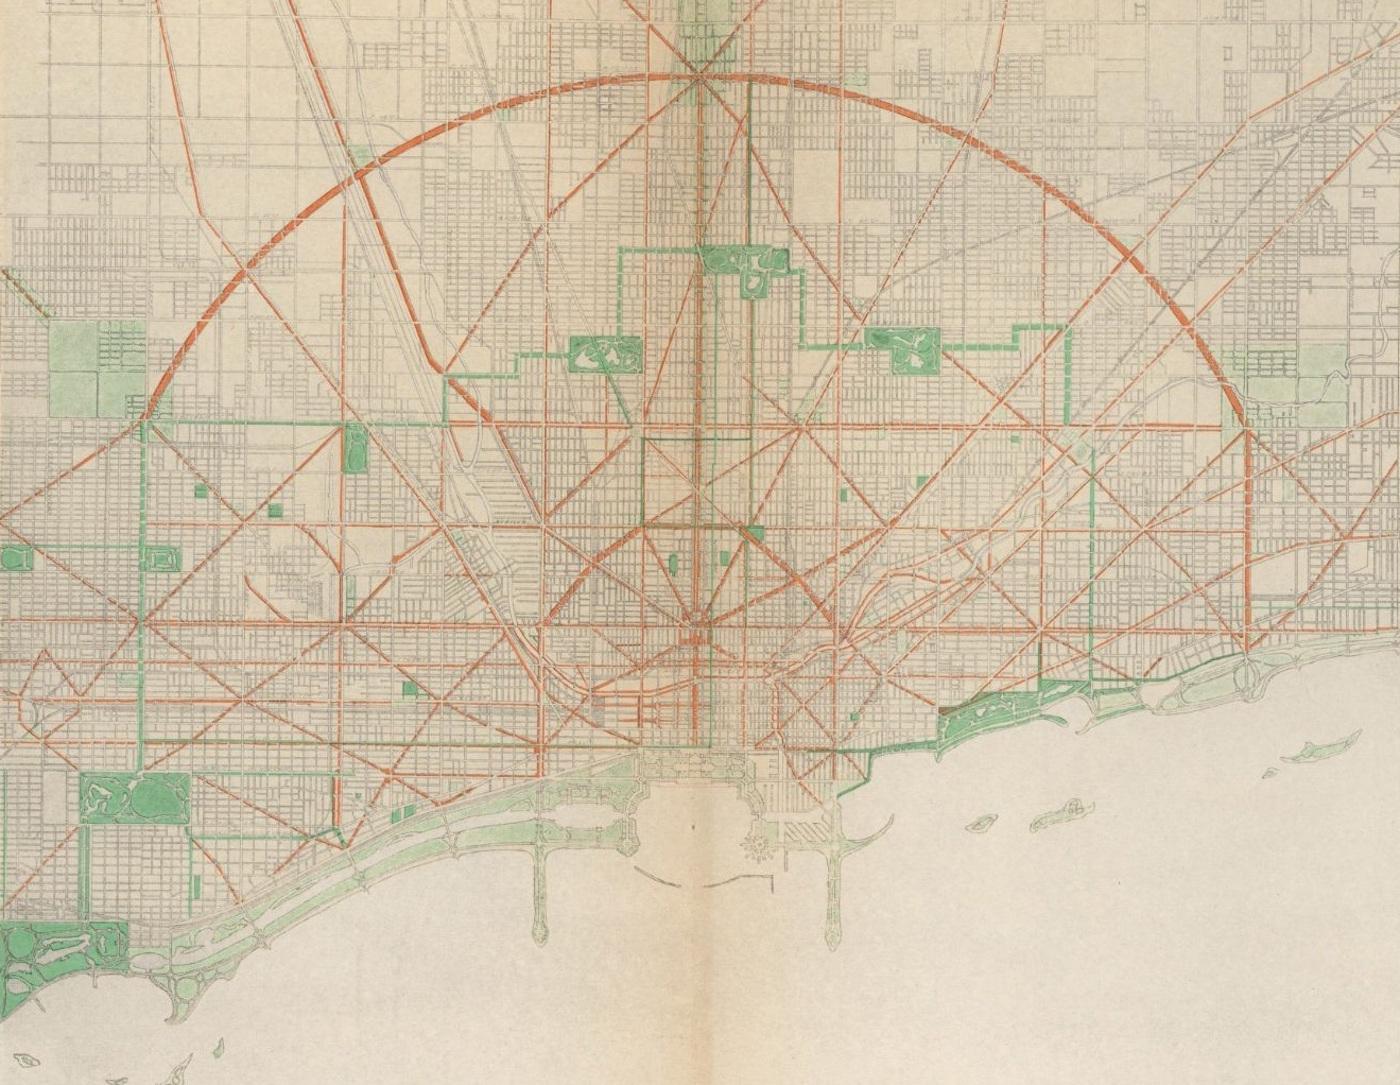 An illustration from the 1909 'Plan of Chicago' depicting a proposed layout of streets. Image: Typ 970U Ref 09.296, Houghton Library, Harvard University/Wikimedia Commons